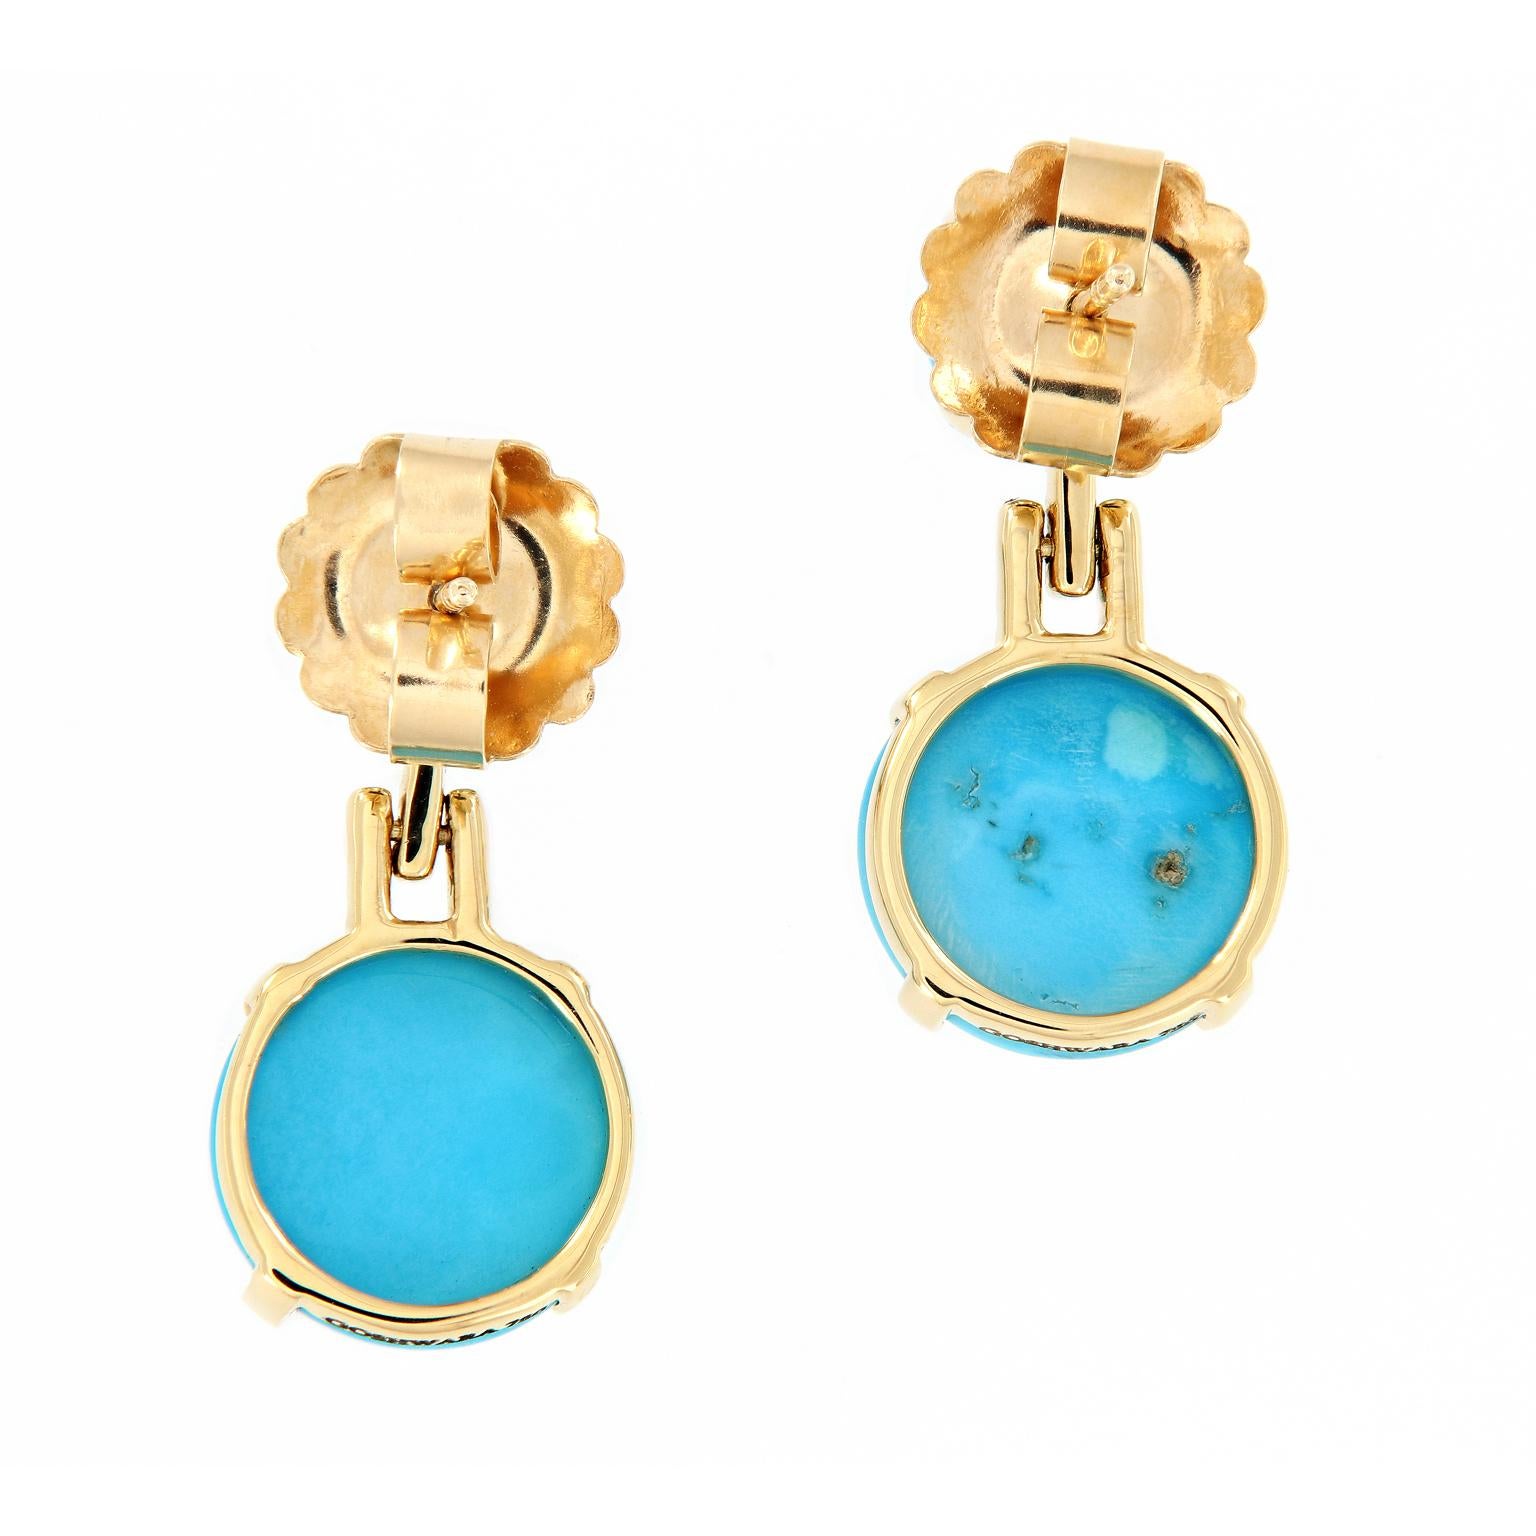 Exquisite drop earrings feature stunning round cabochon turquoise and diamonds in 18k yellow gold. Earrings are from the Rock-N-Roll Collection designed by Goshwara. Weigh 7.4 grams. 25mm long. Marked Goshwara.

Turquoise 13.10 cttw
Diamond 0.11 cttw